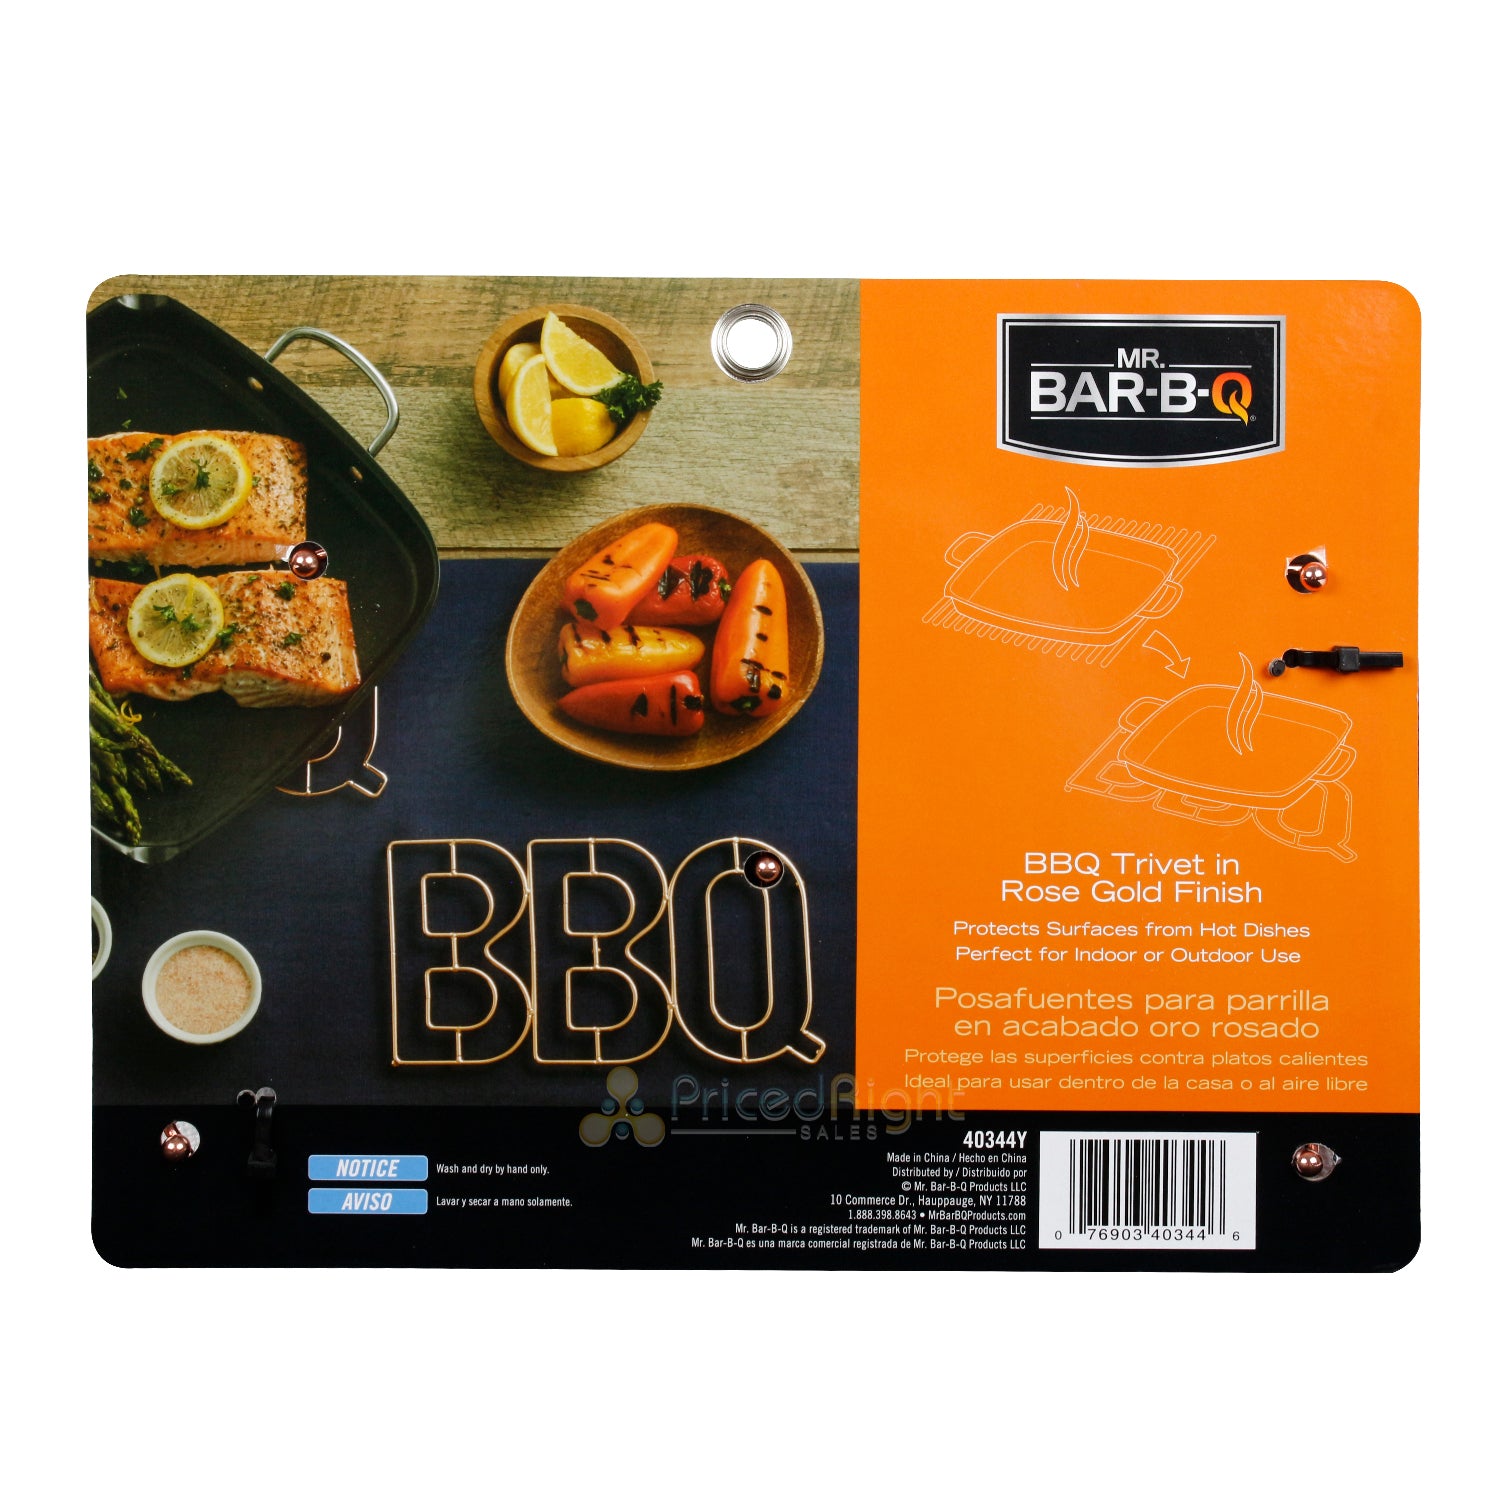 Mr. Bar-B-Q "BBQ" Trivet Metal Rose Gold Finish For Indoor And Outdoor Cooking